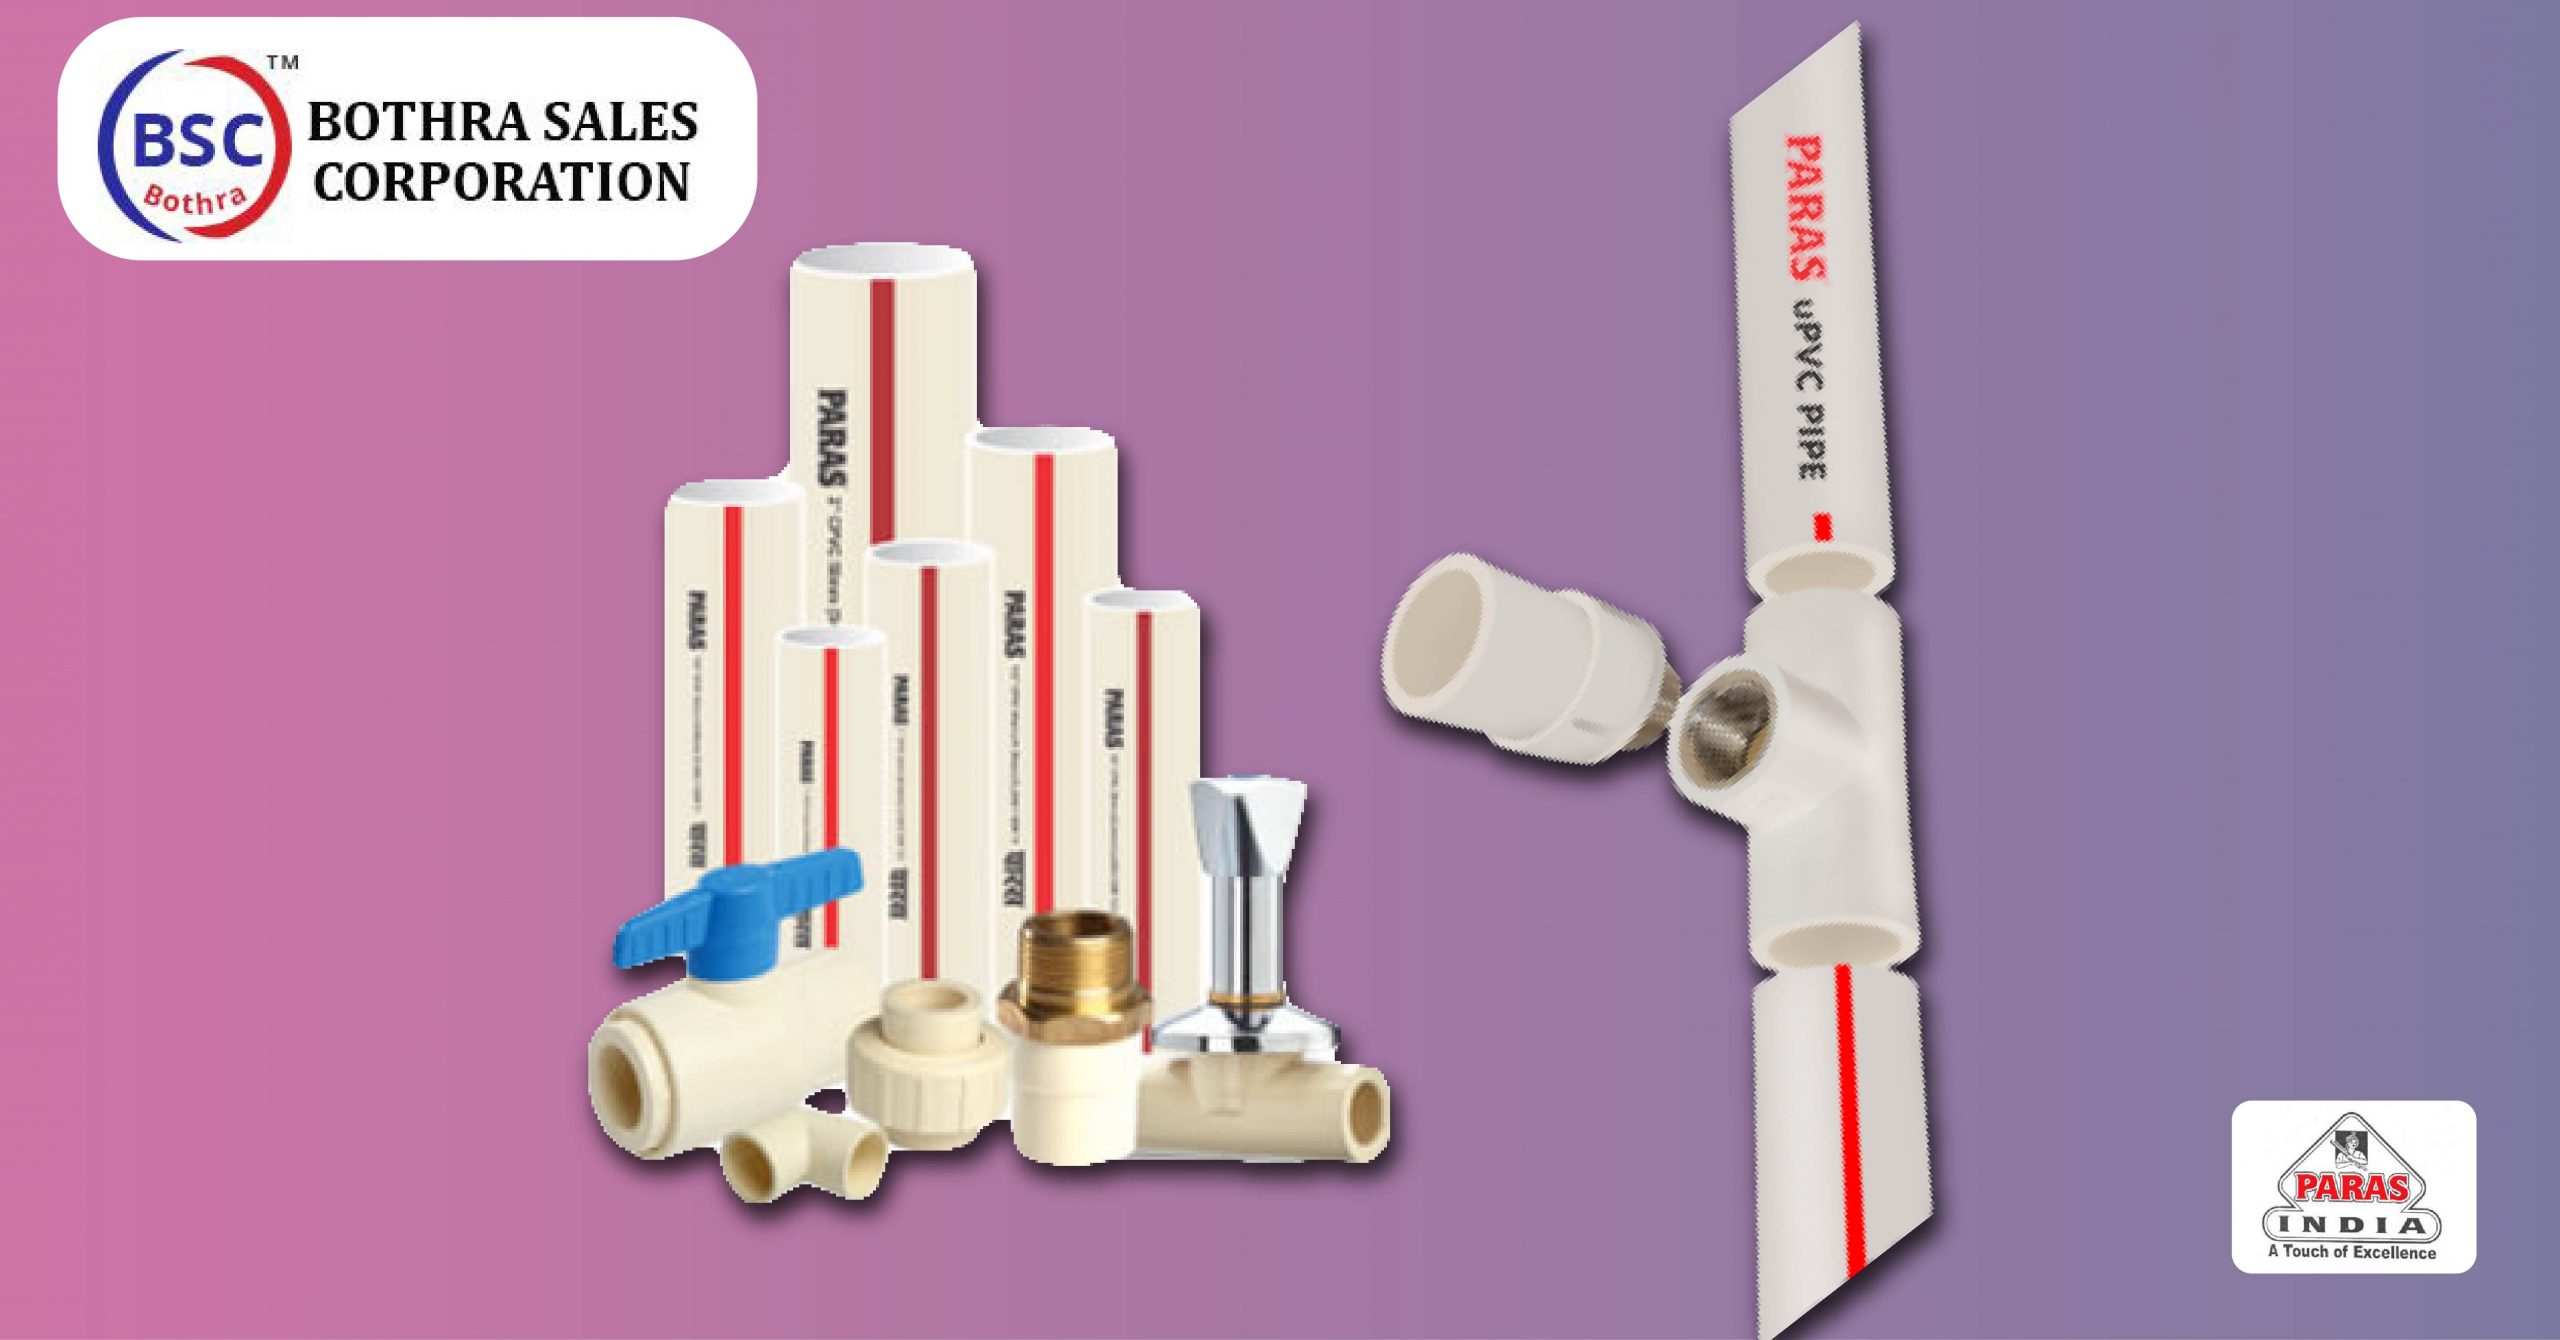 Paras pipes & fittings are the best solutions for the Hot & Cold water Plumbing system